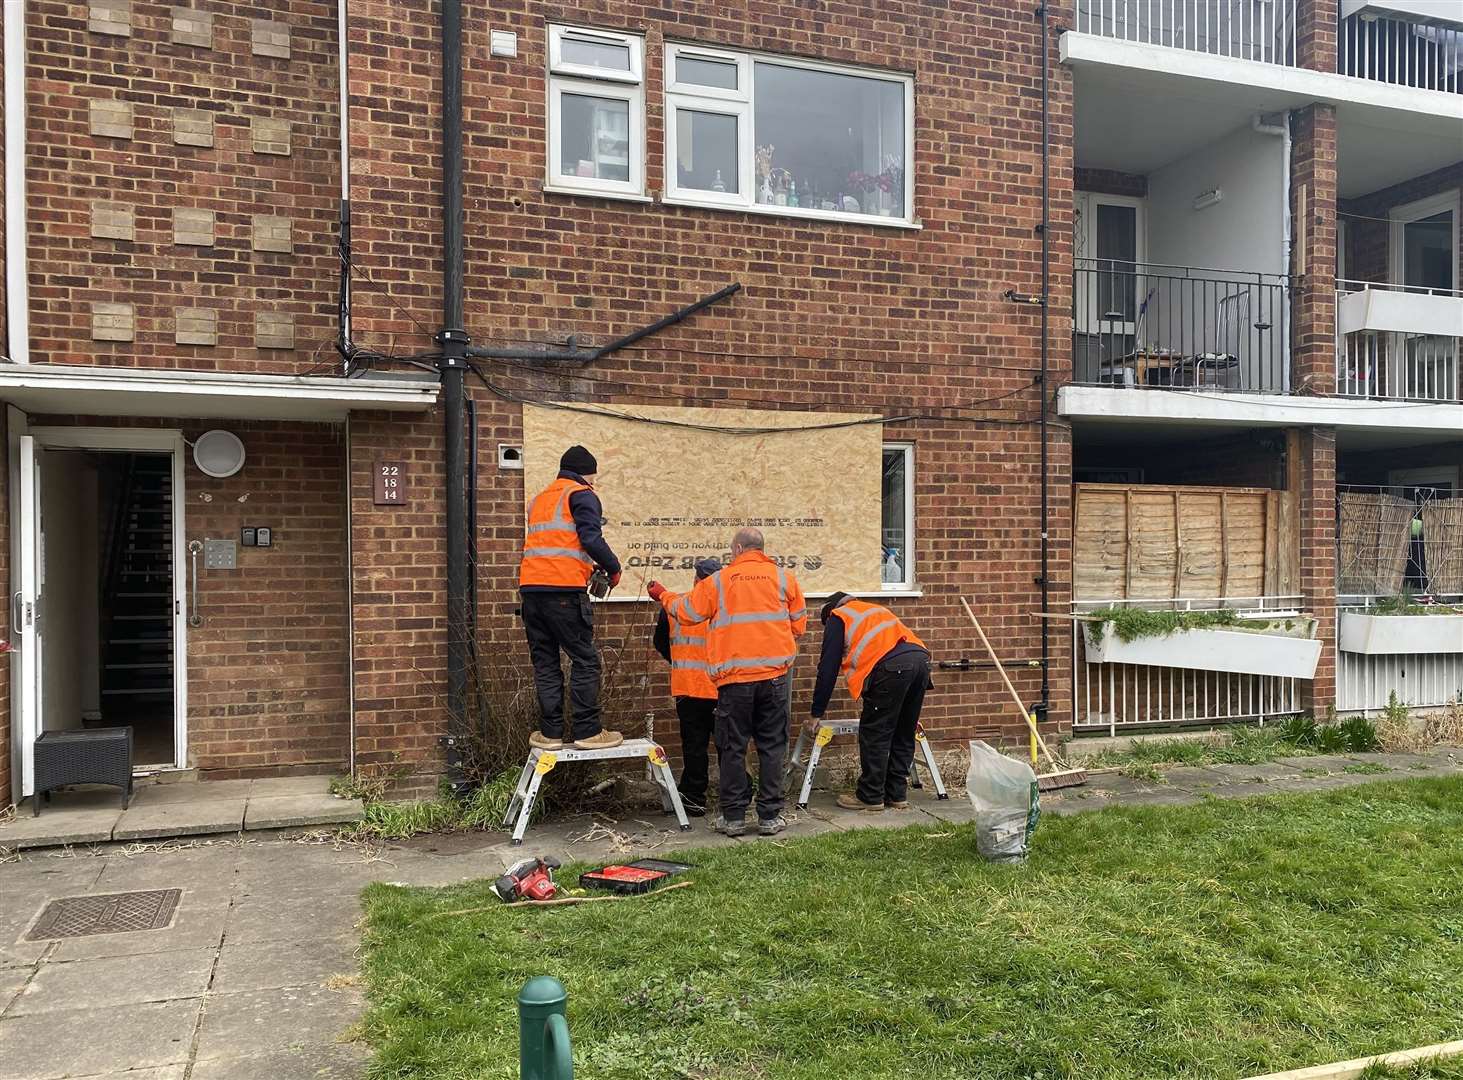 The window of a ground-floor flat has been boarded up in Catlyn Close, East Malling